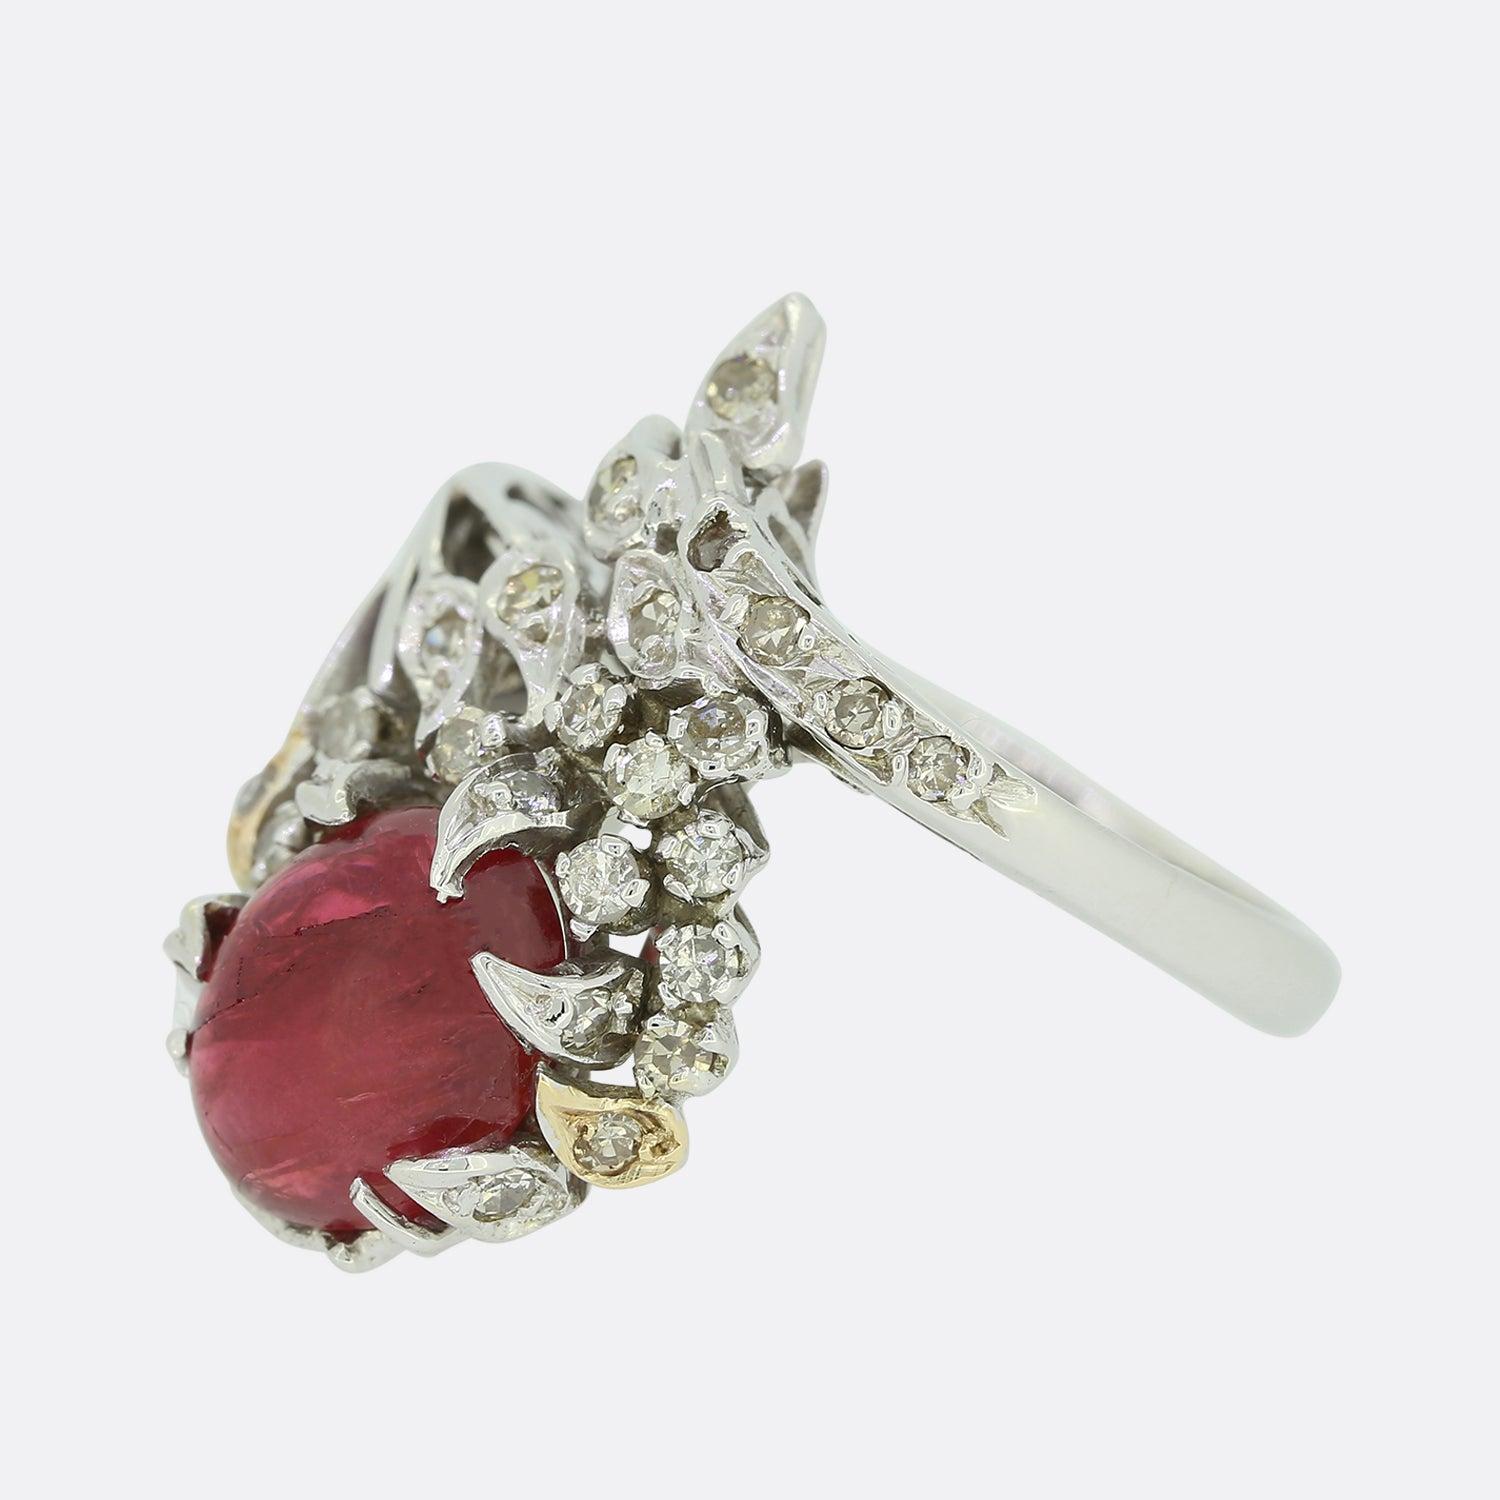 This is a wonderful vintage ruby and diamond ring. The ring features a large cabochon ruby surrounded by a cluster of single cut diamonds which have been set in an unusual shaped abstract setting crafted in 18ct white gold. 

Condition: Used (Very